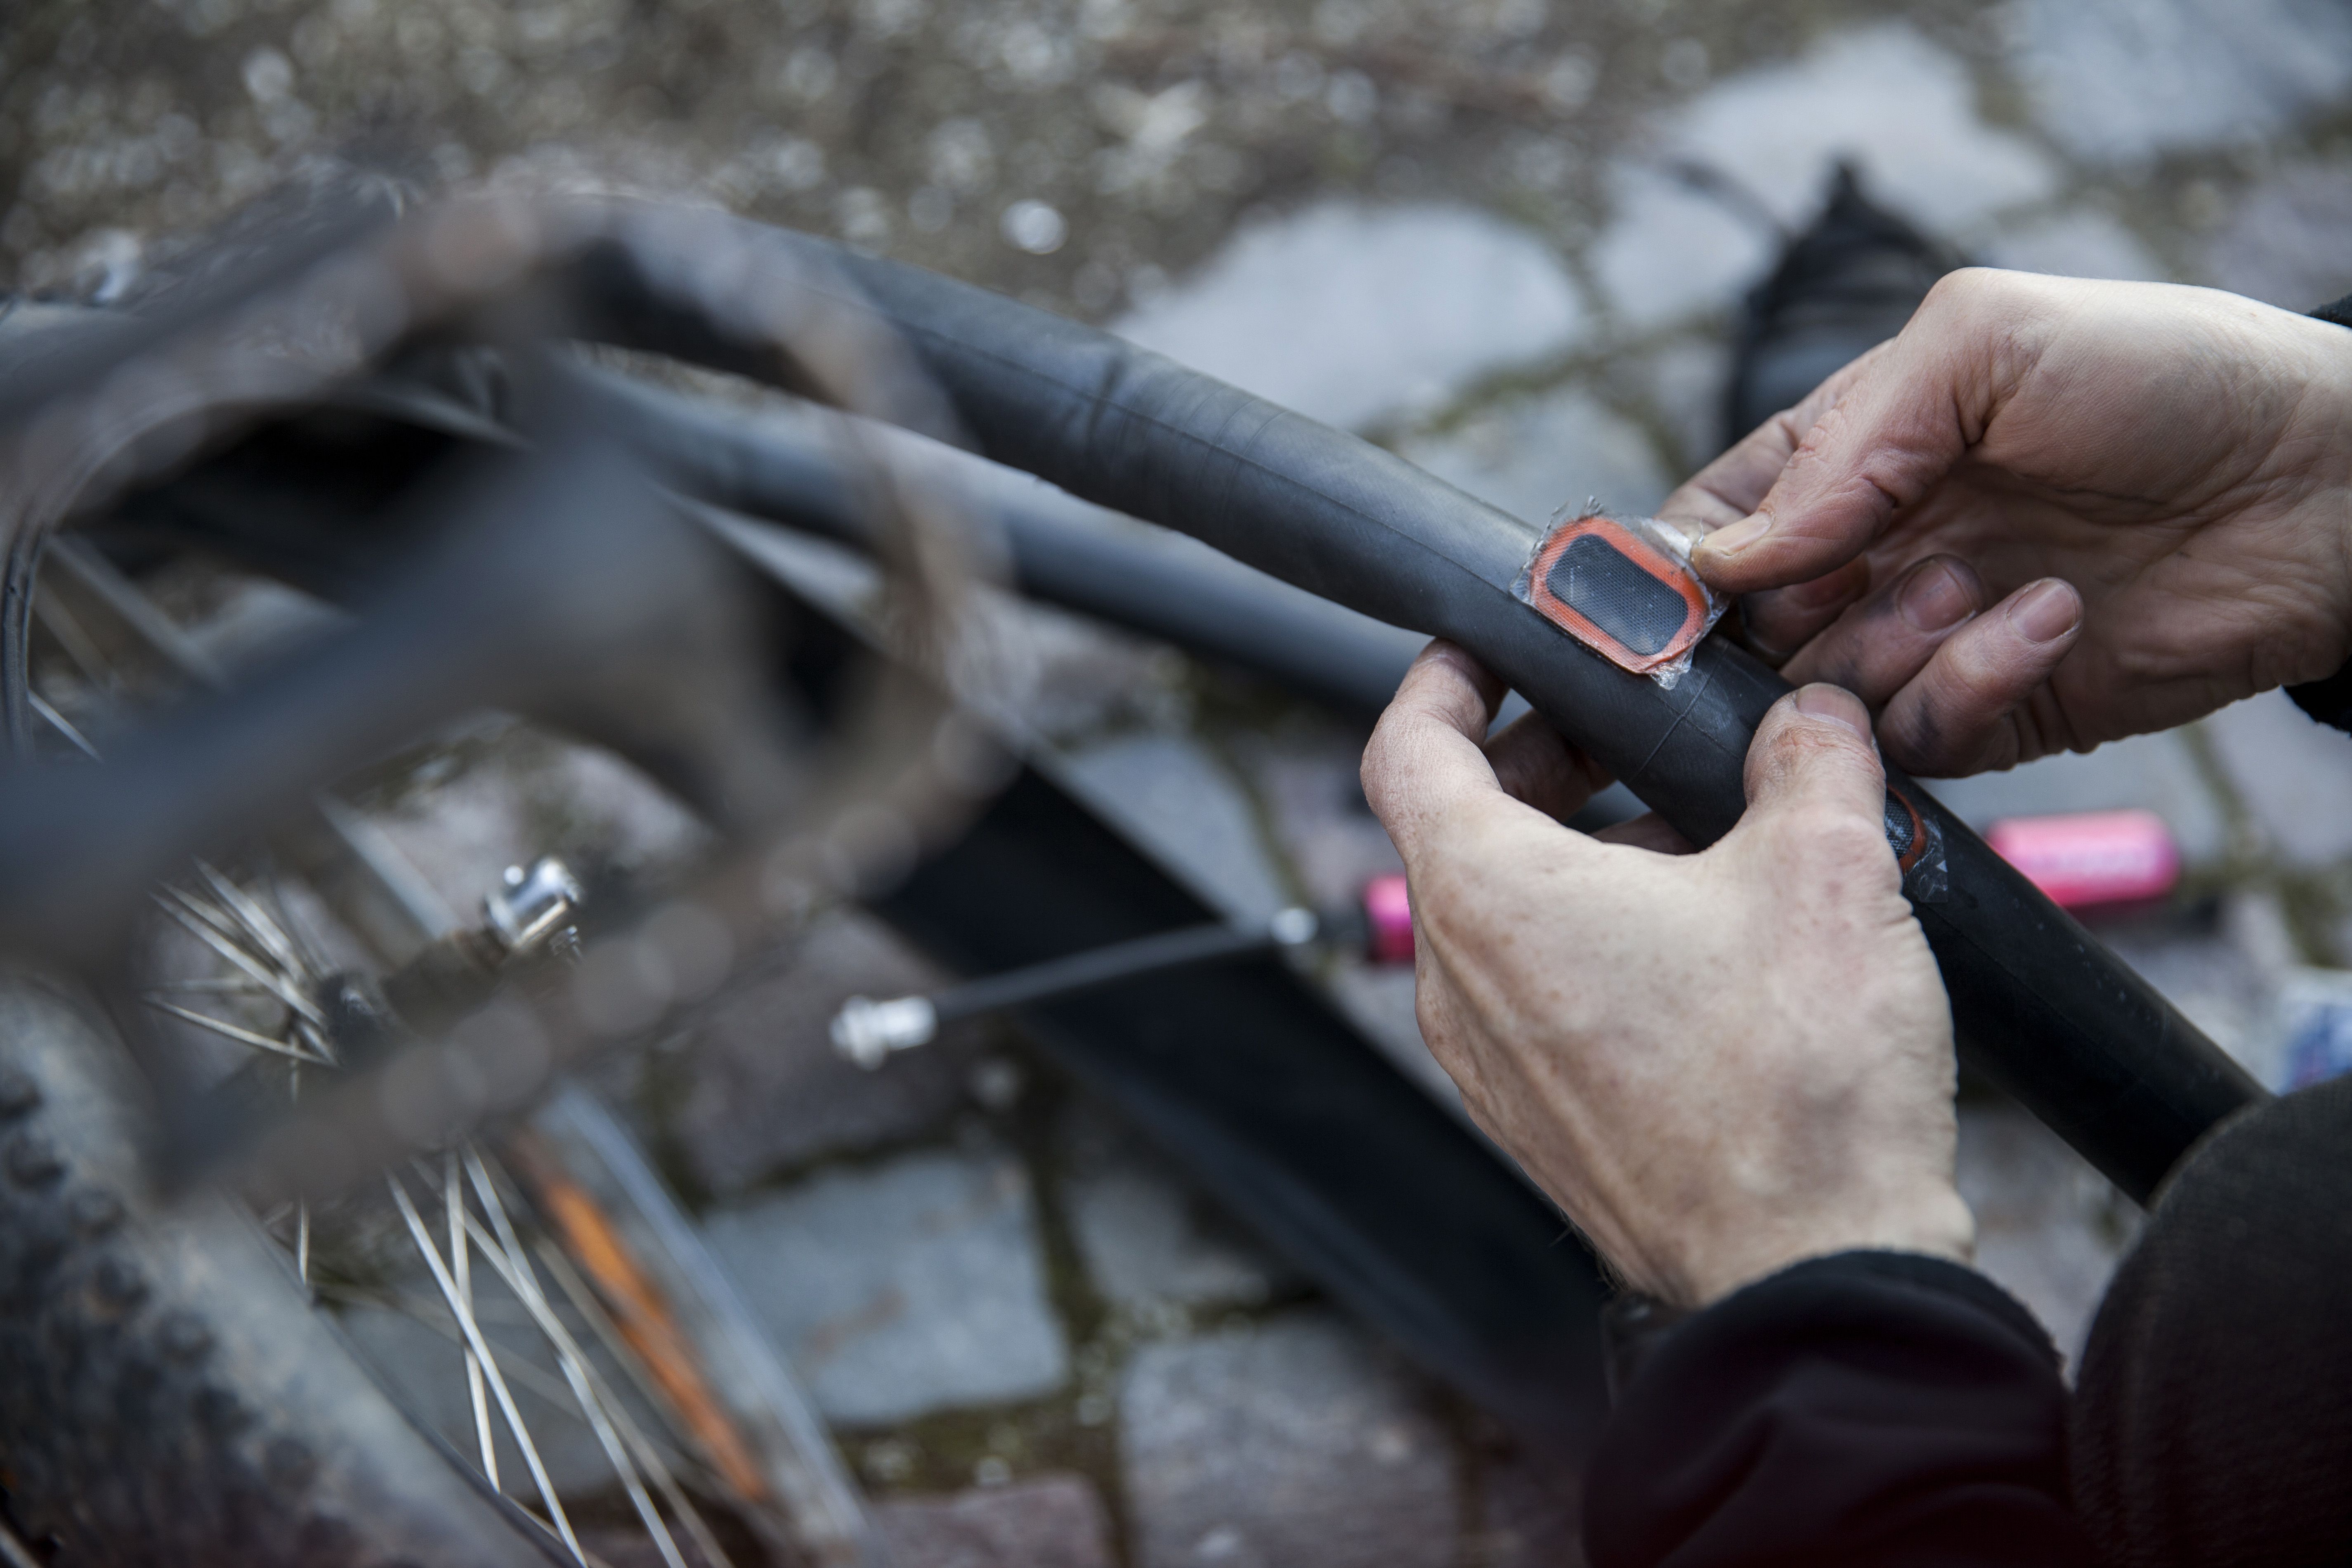 How to Patch an Inner Tube of a Flat Bike Tire